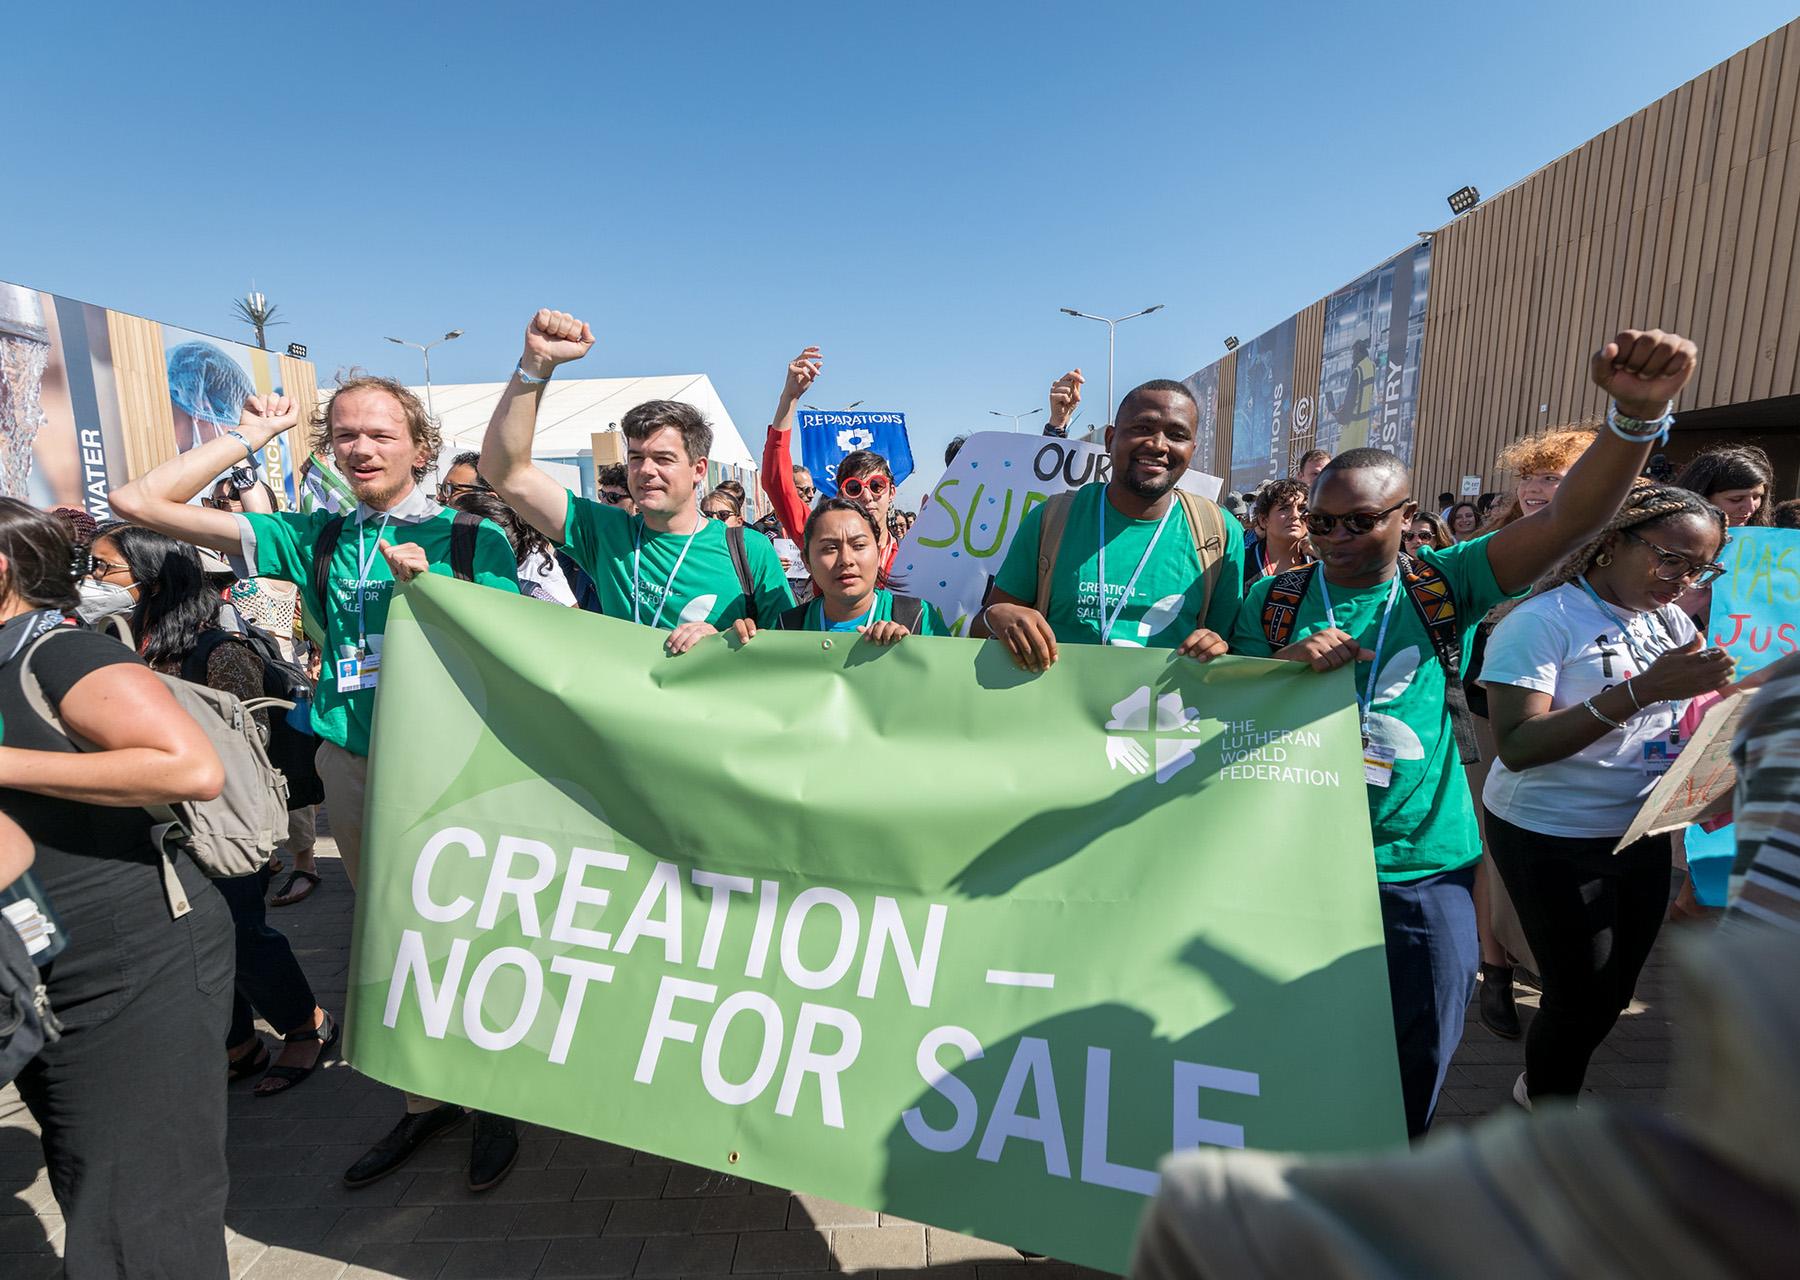 The LWF delegation joins the march through the venue of the United Nations climate change conference COP27 in Sharm el-Sheikh, Egypt, calling for climate justice and urgent action. Photo credit: LWF/Albin Hillert